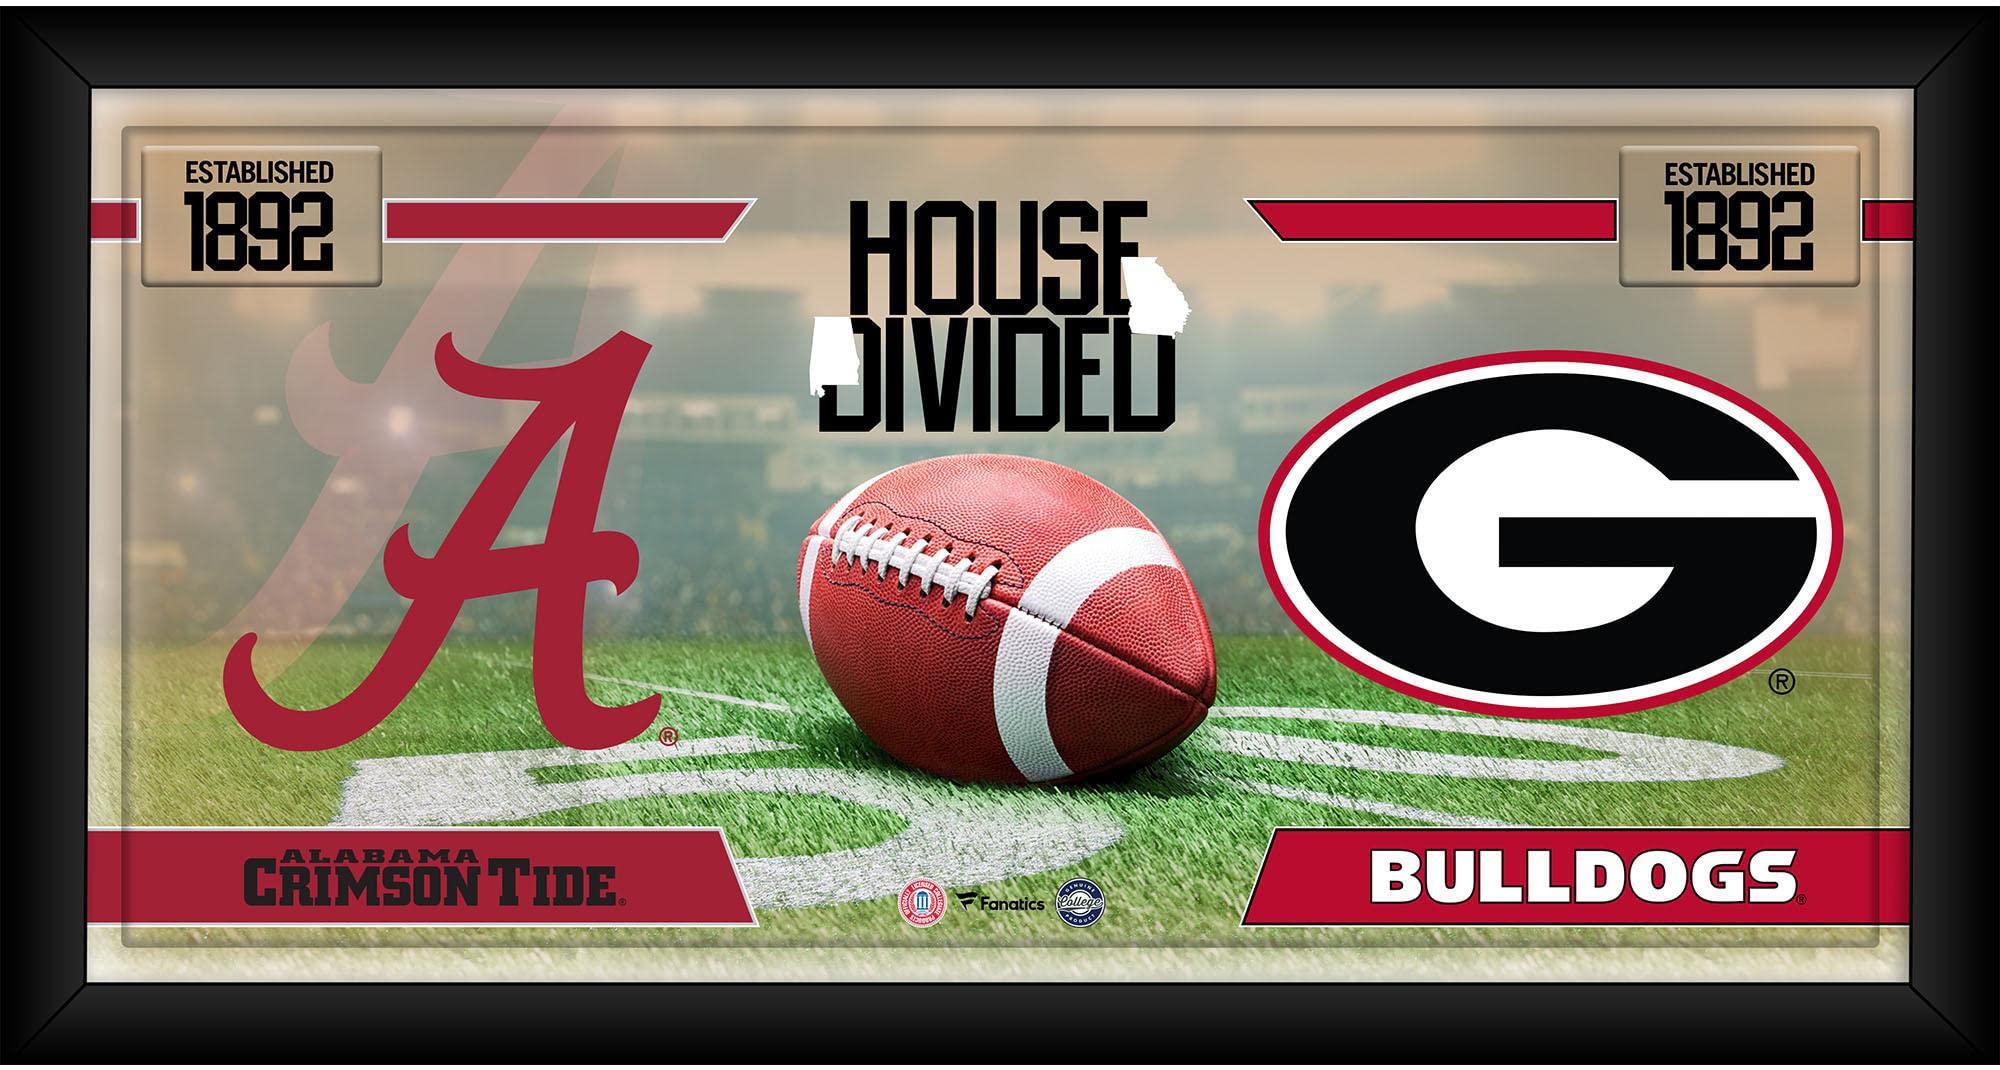 Alabama Crimson Tide vs. Georgia Bulldogs Framed 10" x 20" House Divided Football Collage - College Team Plaques and Collages